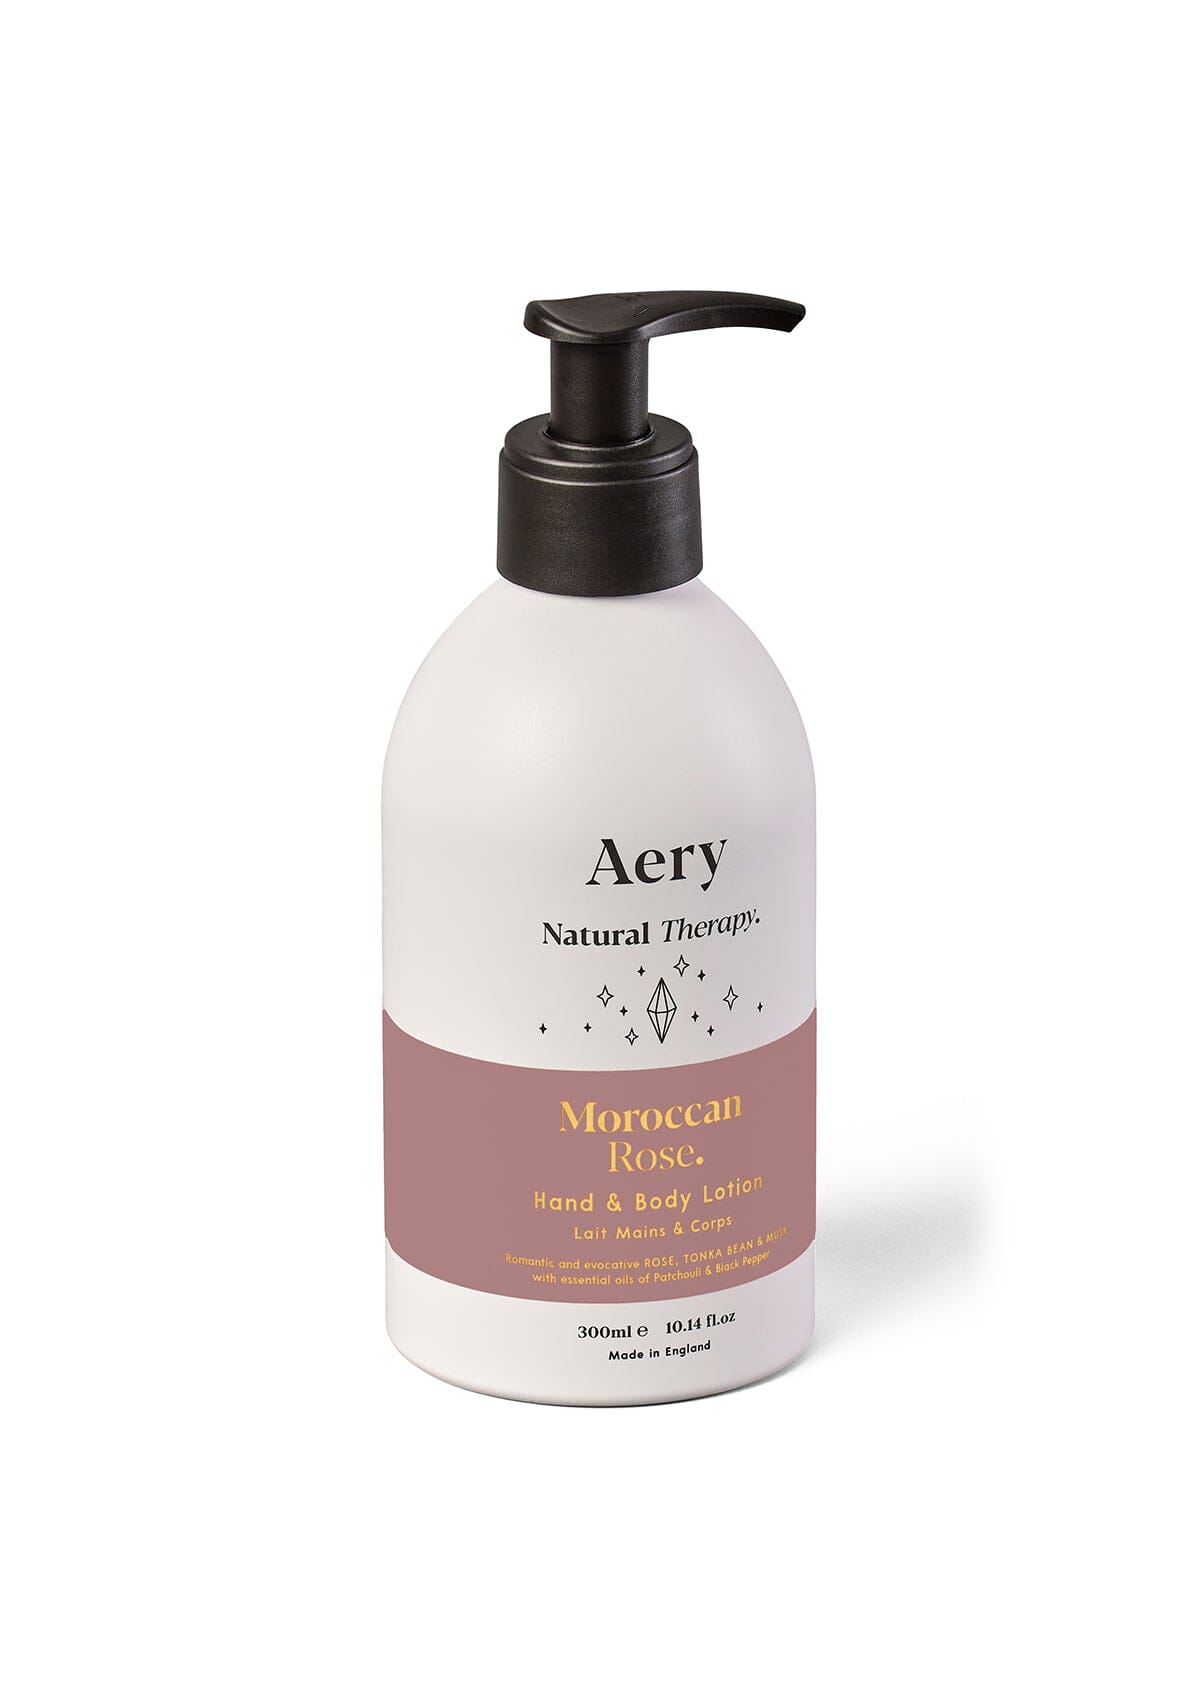 Aubergine Moroccan Rose Hand and Body Lotion by Aery displayed on white background